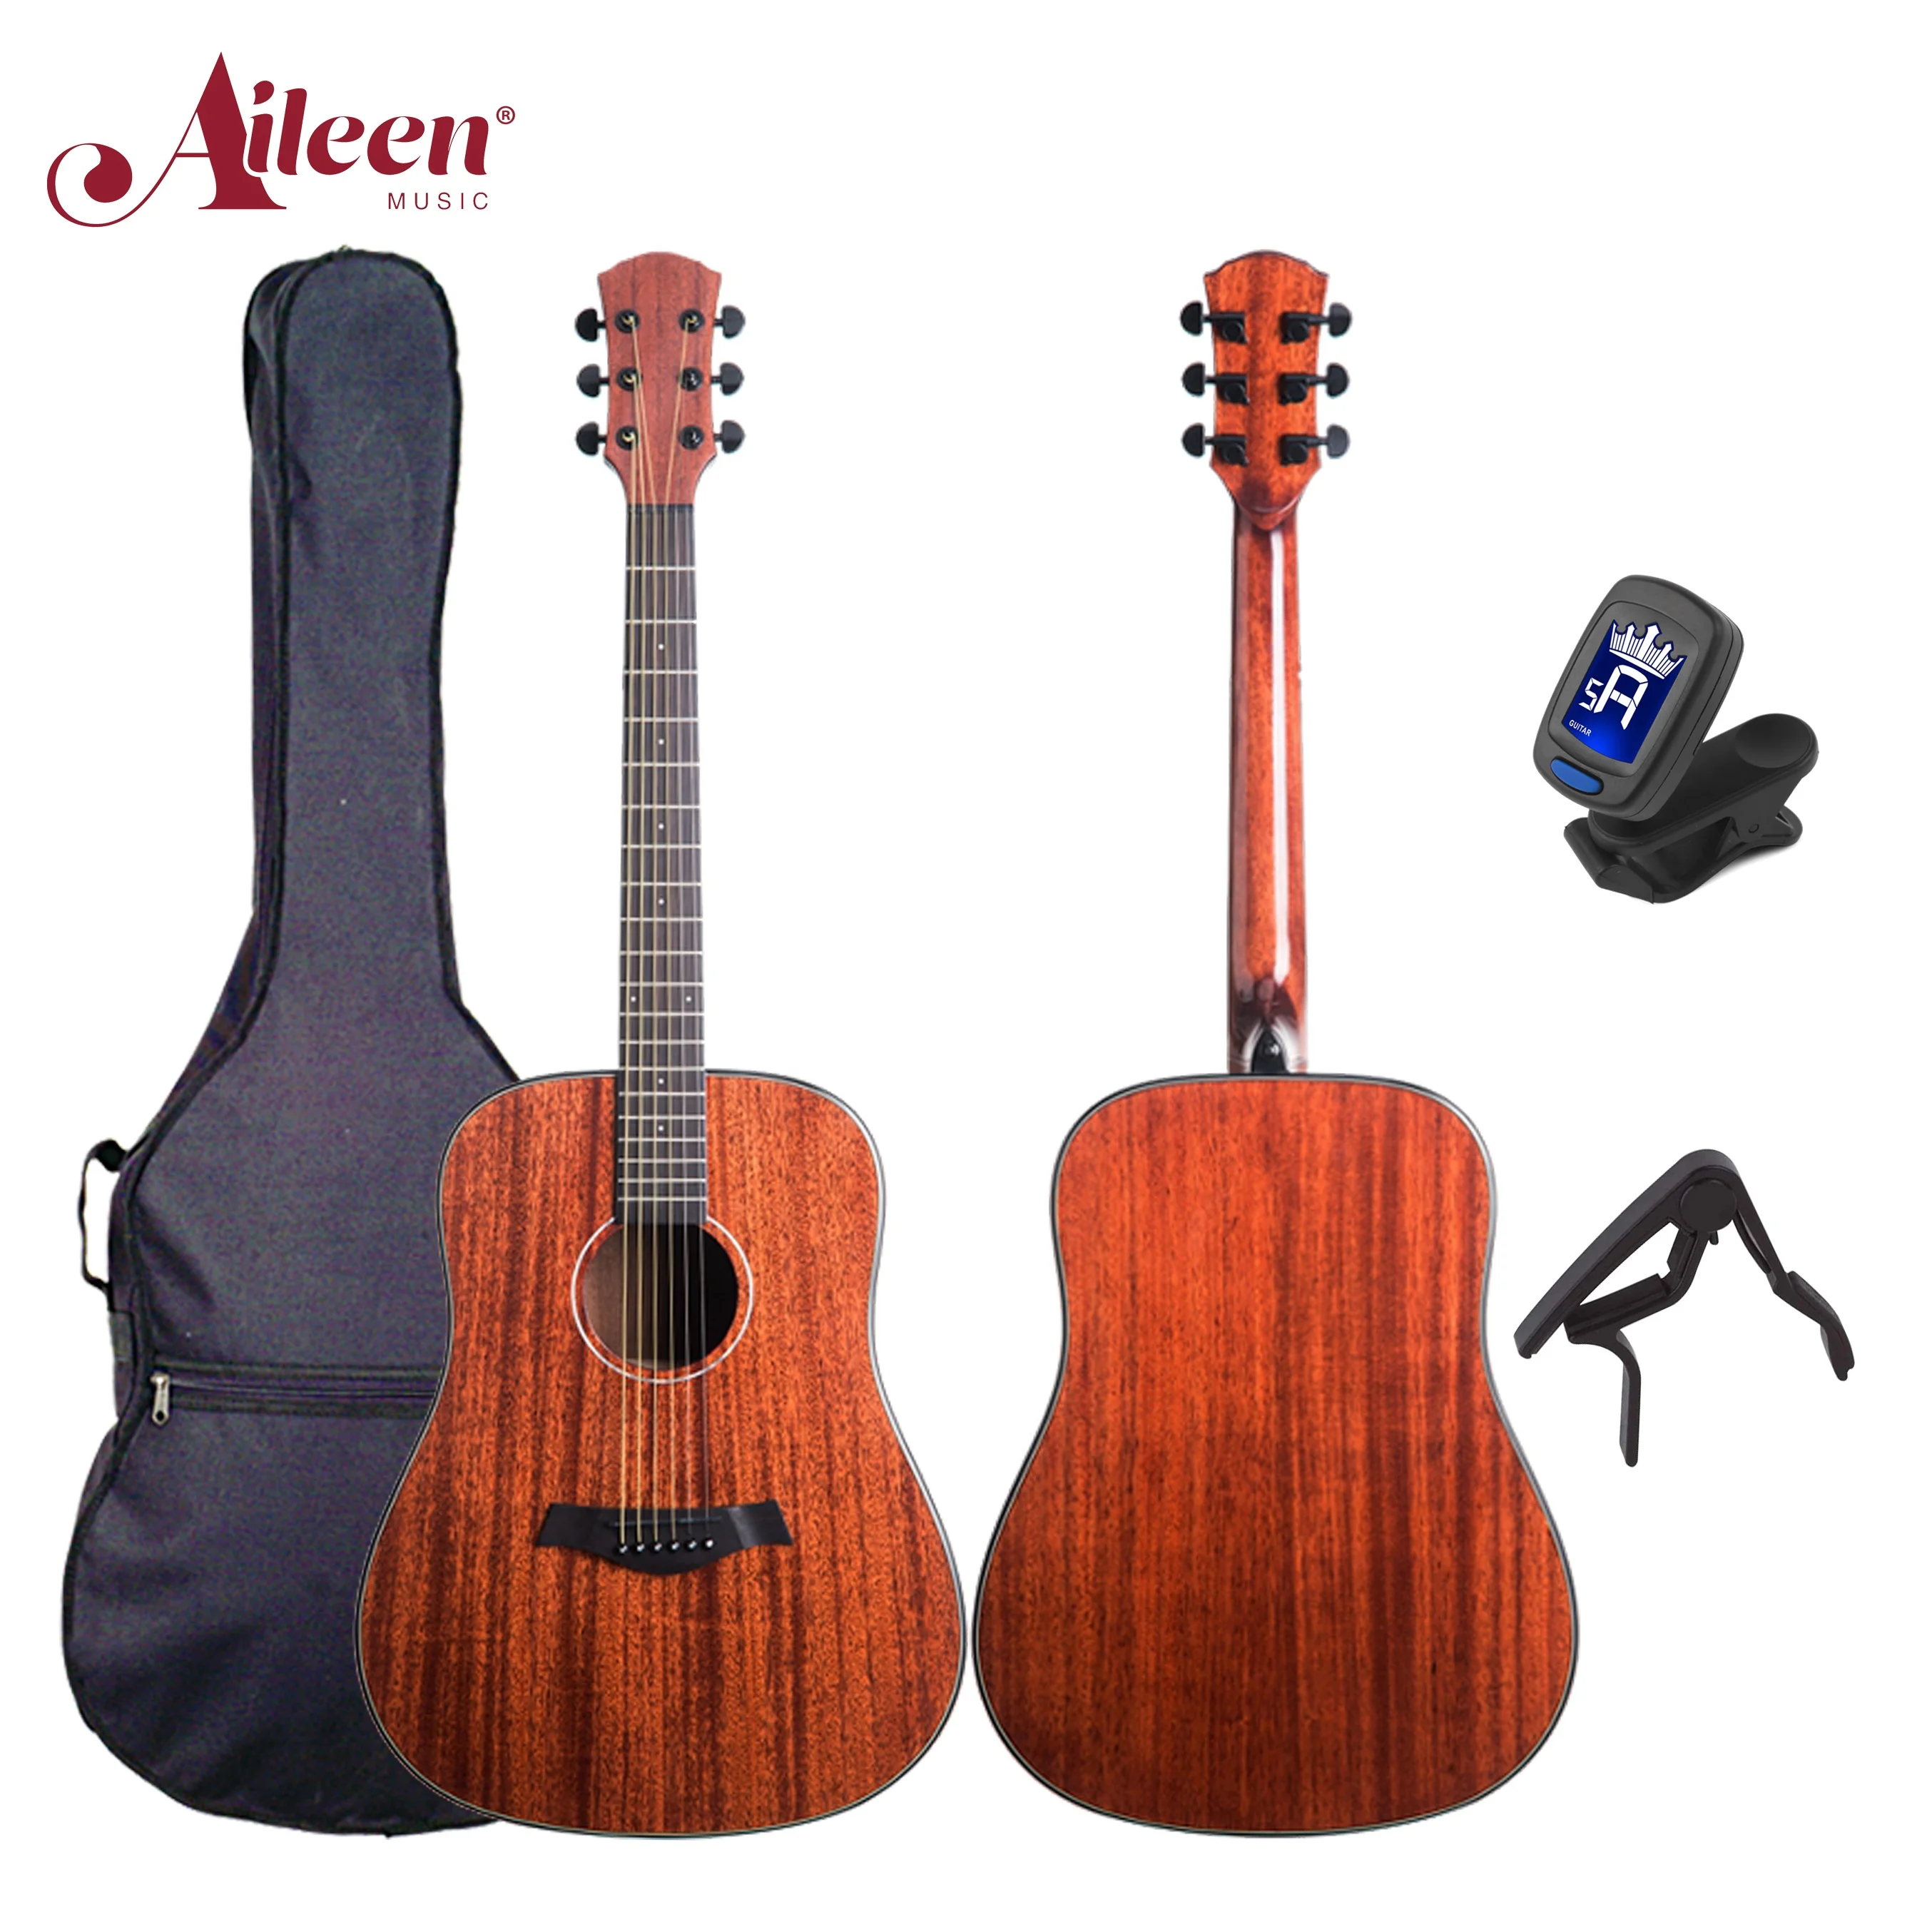 

AileenMusic hand-rubbed varnish antique style Mahogany solid wood acoustic guitar kit (AFM448)